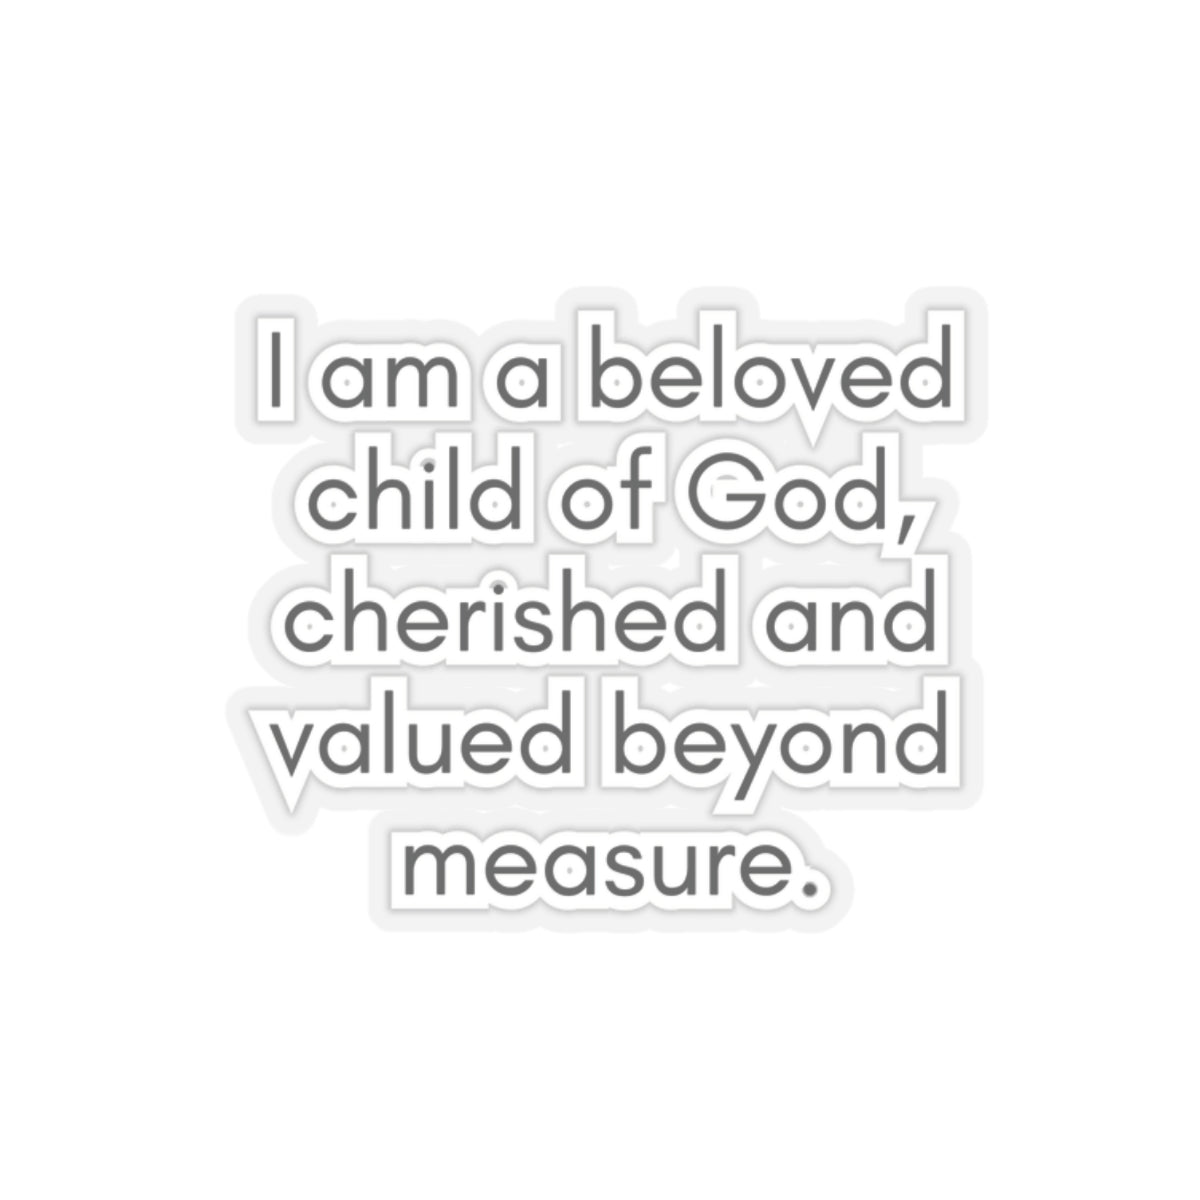 I Am A Beloved Child Of God...Inspirational Quote Kiss-Cut Stickers-Paper products-2" × 2"-Transparent-mysticalcherry